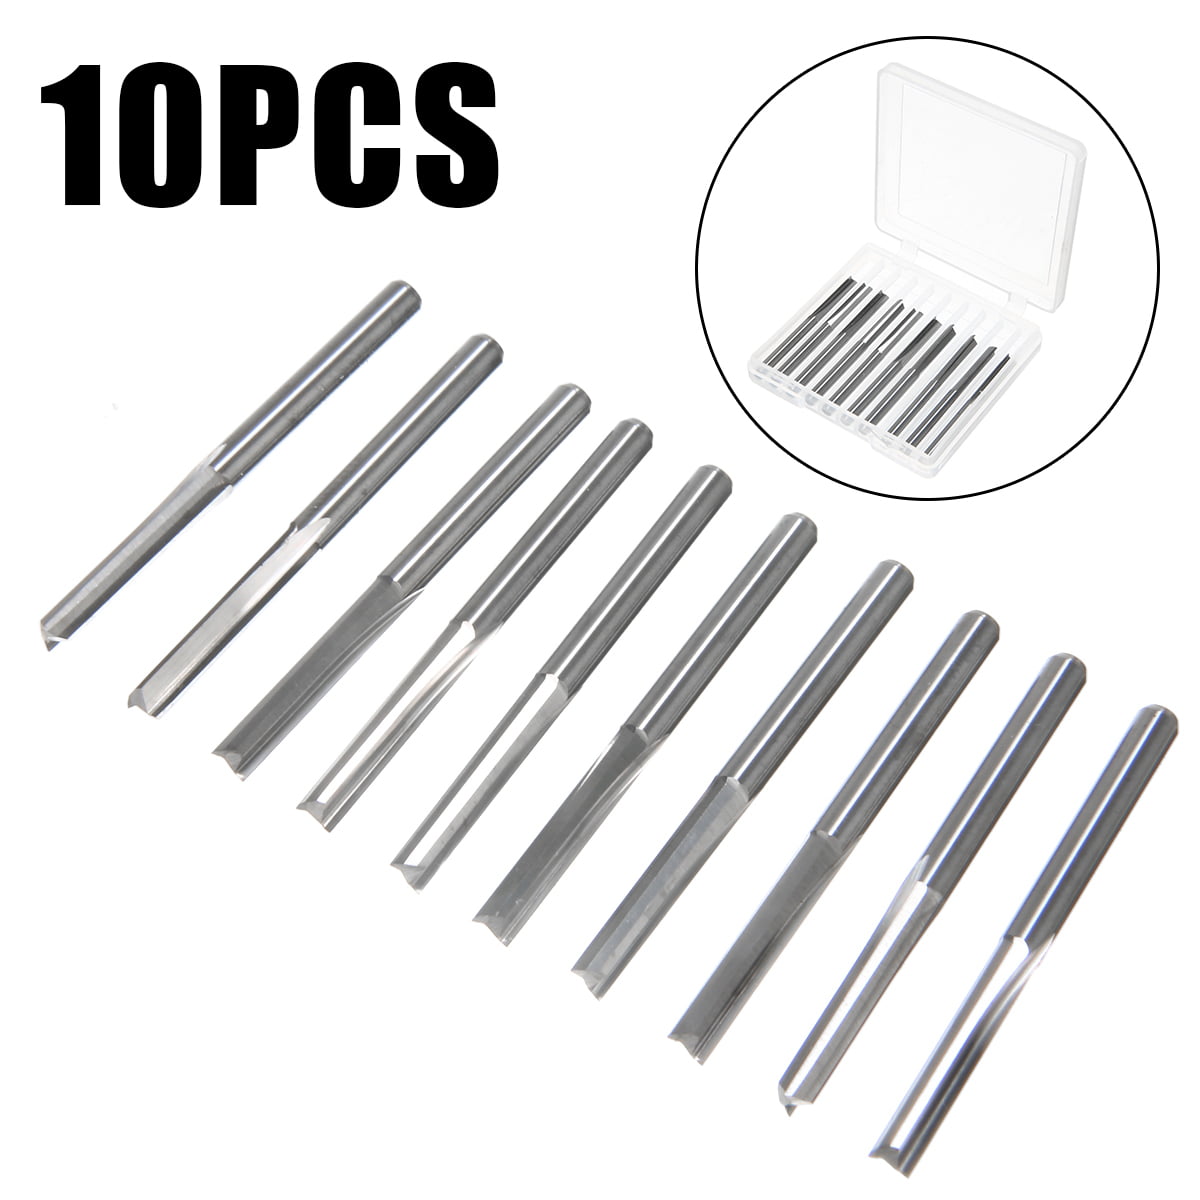 10pcs Two Flute Straight Slot CNC Router Bit For Wood MDF Milling 1/8 17mm Tool 